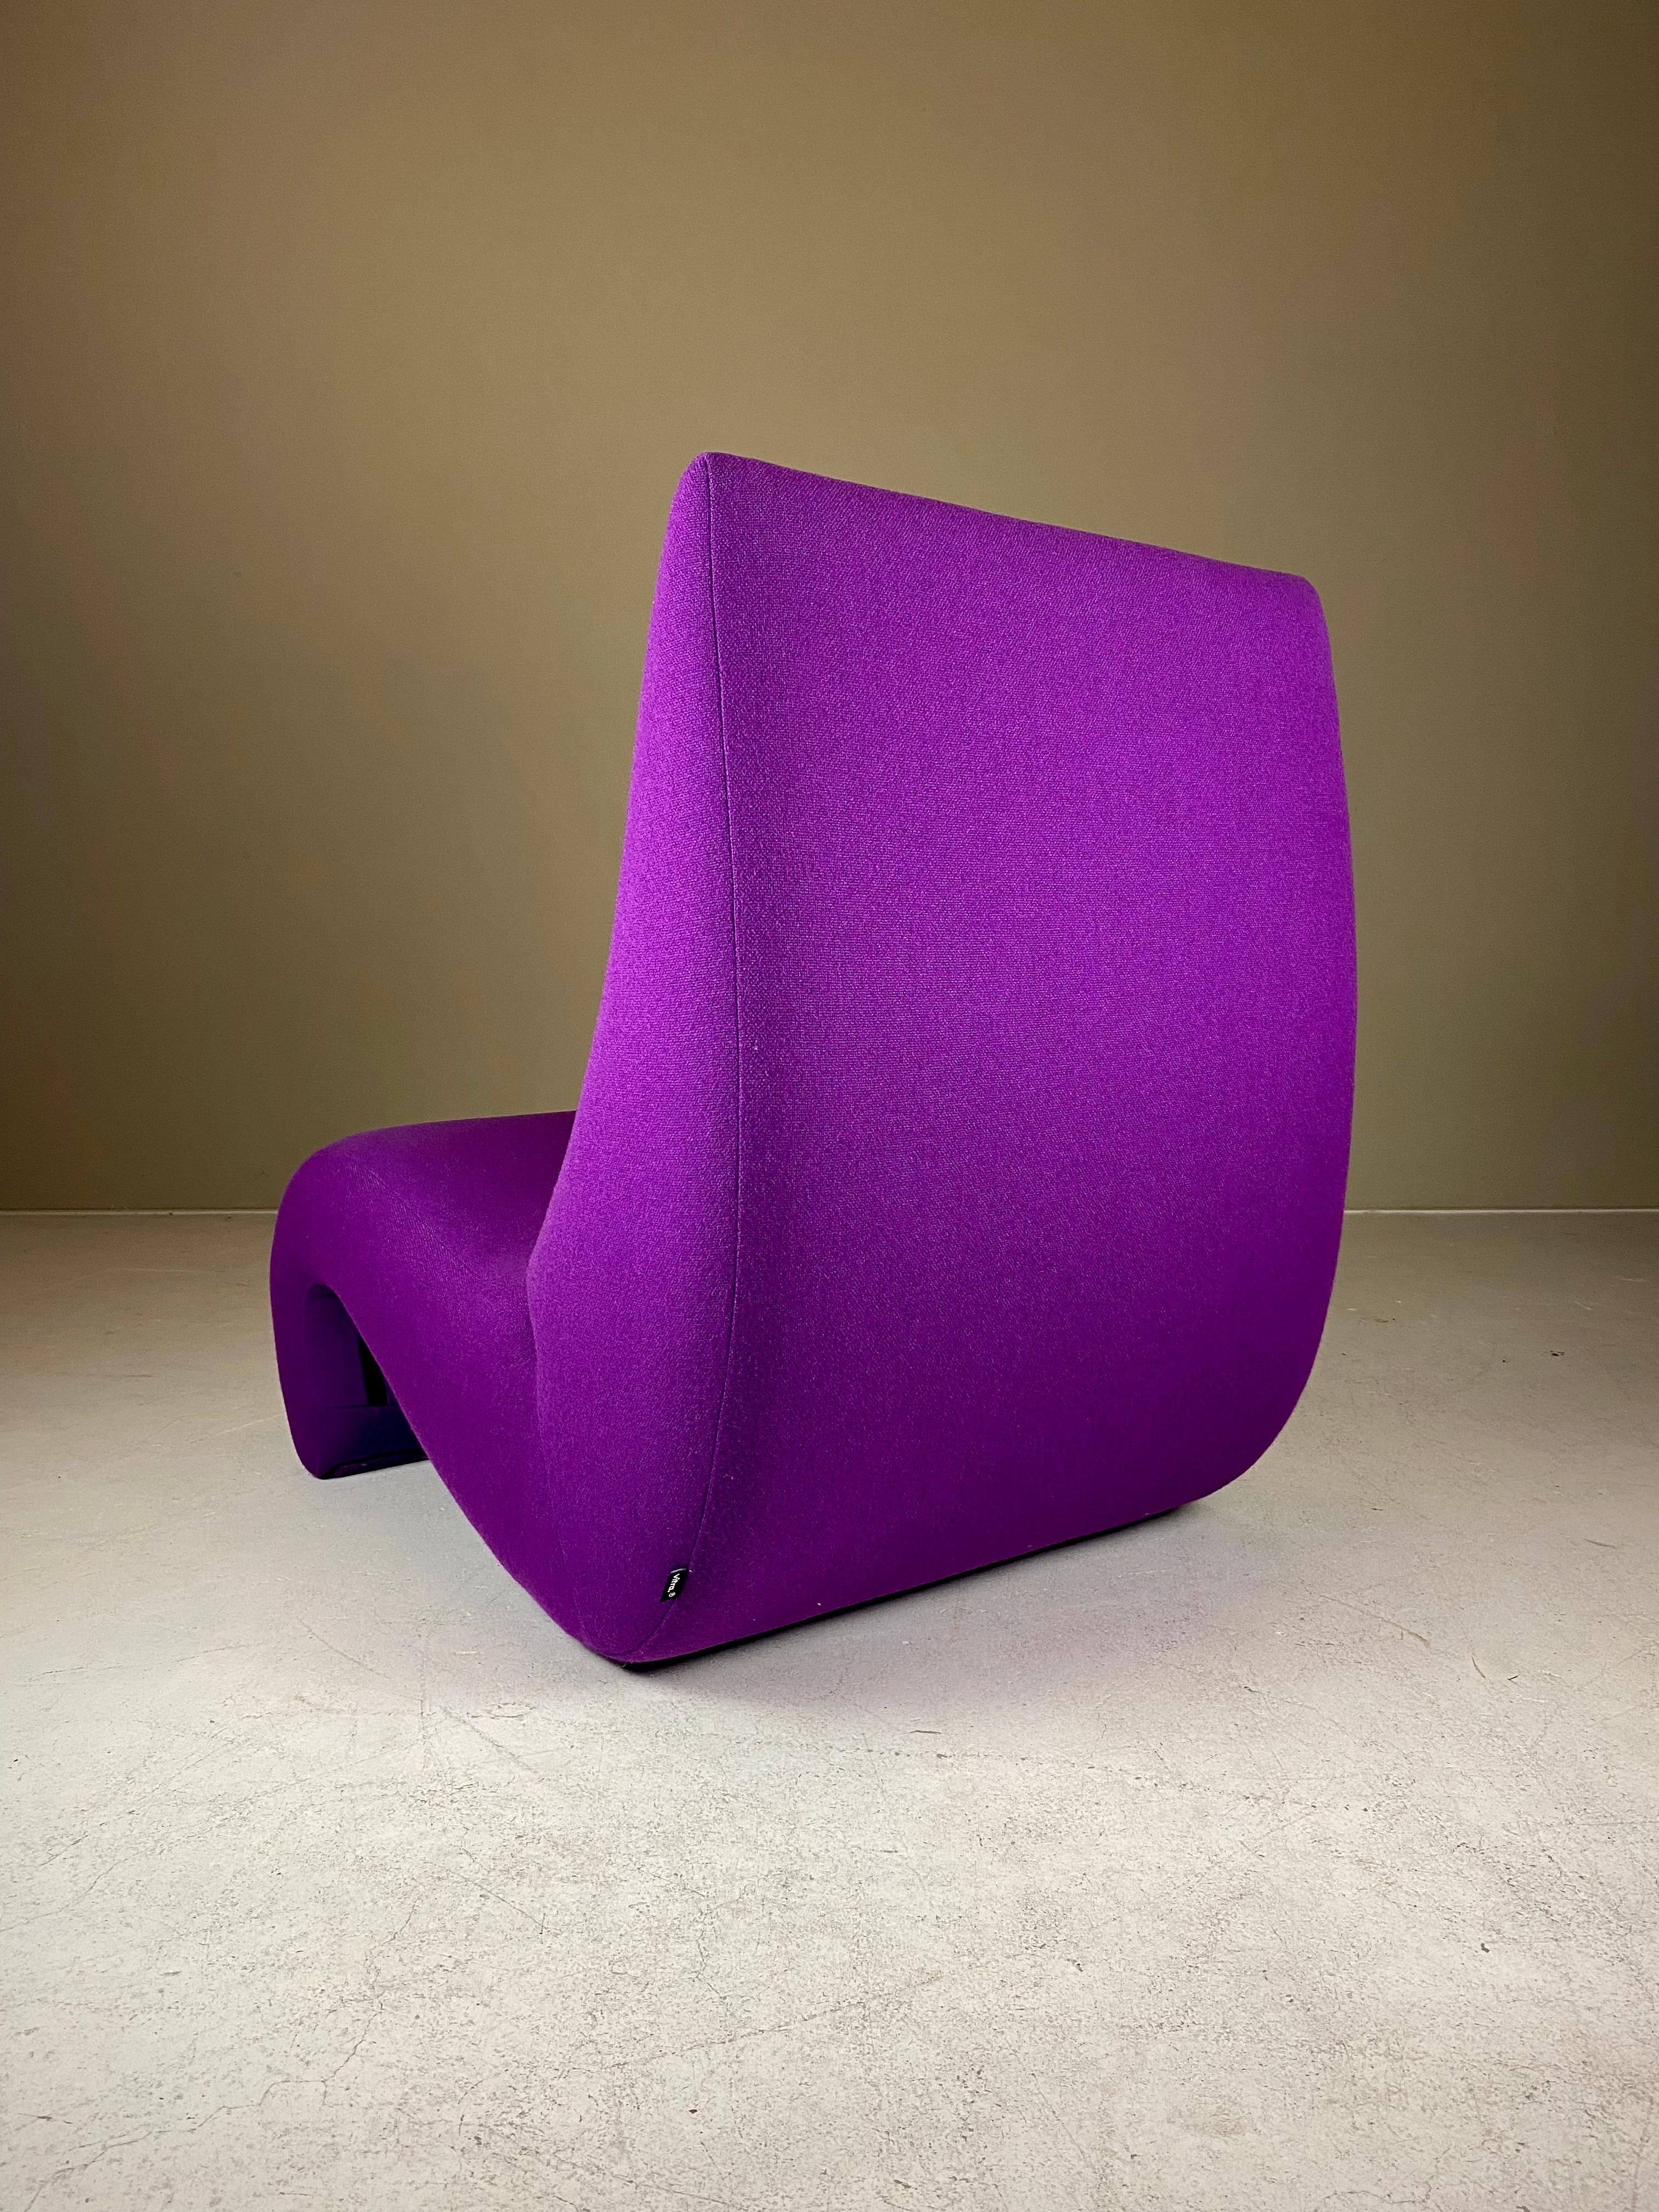 Originally designed by Verner Panton's for his famous Visiona installation in 1970, the Amoebe Lounge Chair grew out to become one of the icons of modern design. It perfectly captures the bold zeitgeist of the 1970s, it oozes Space Age, and is is a